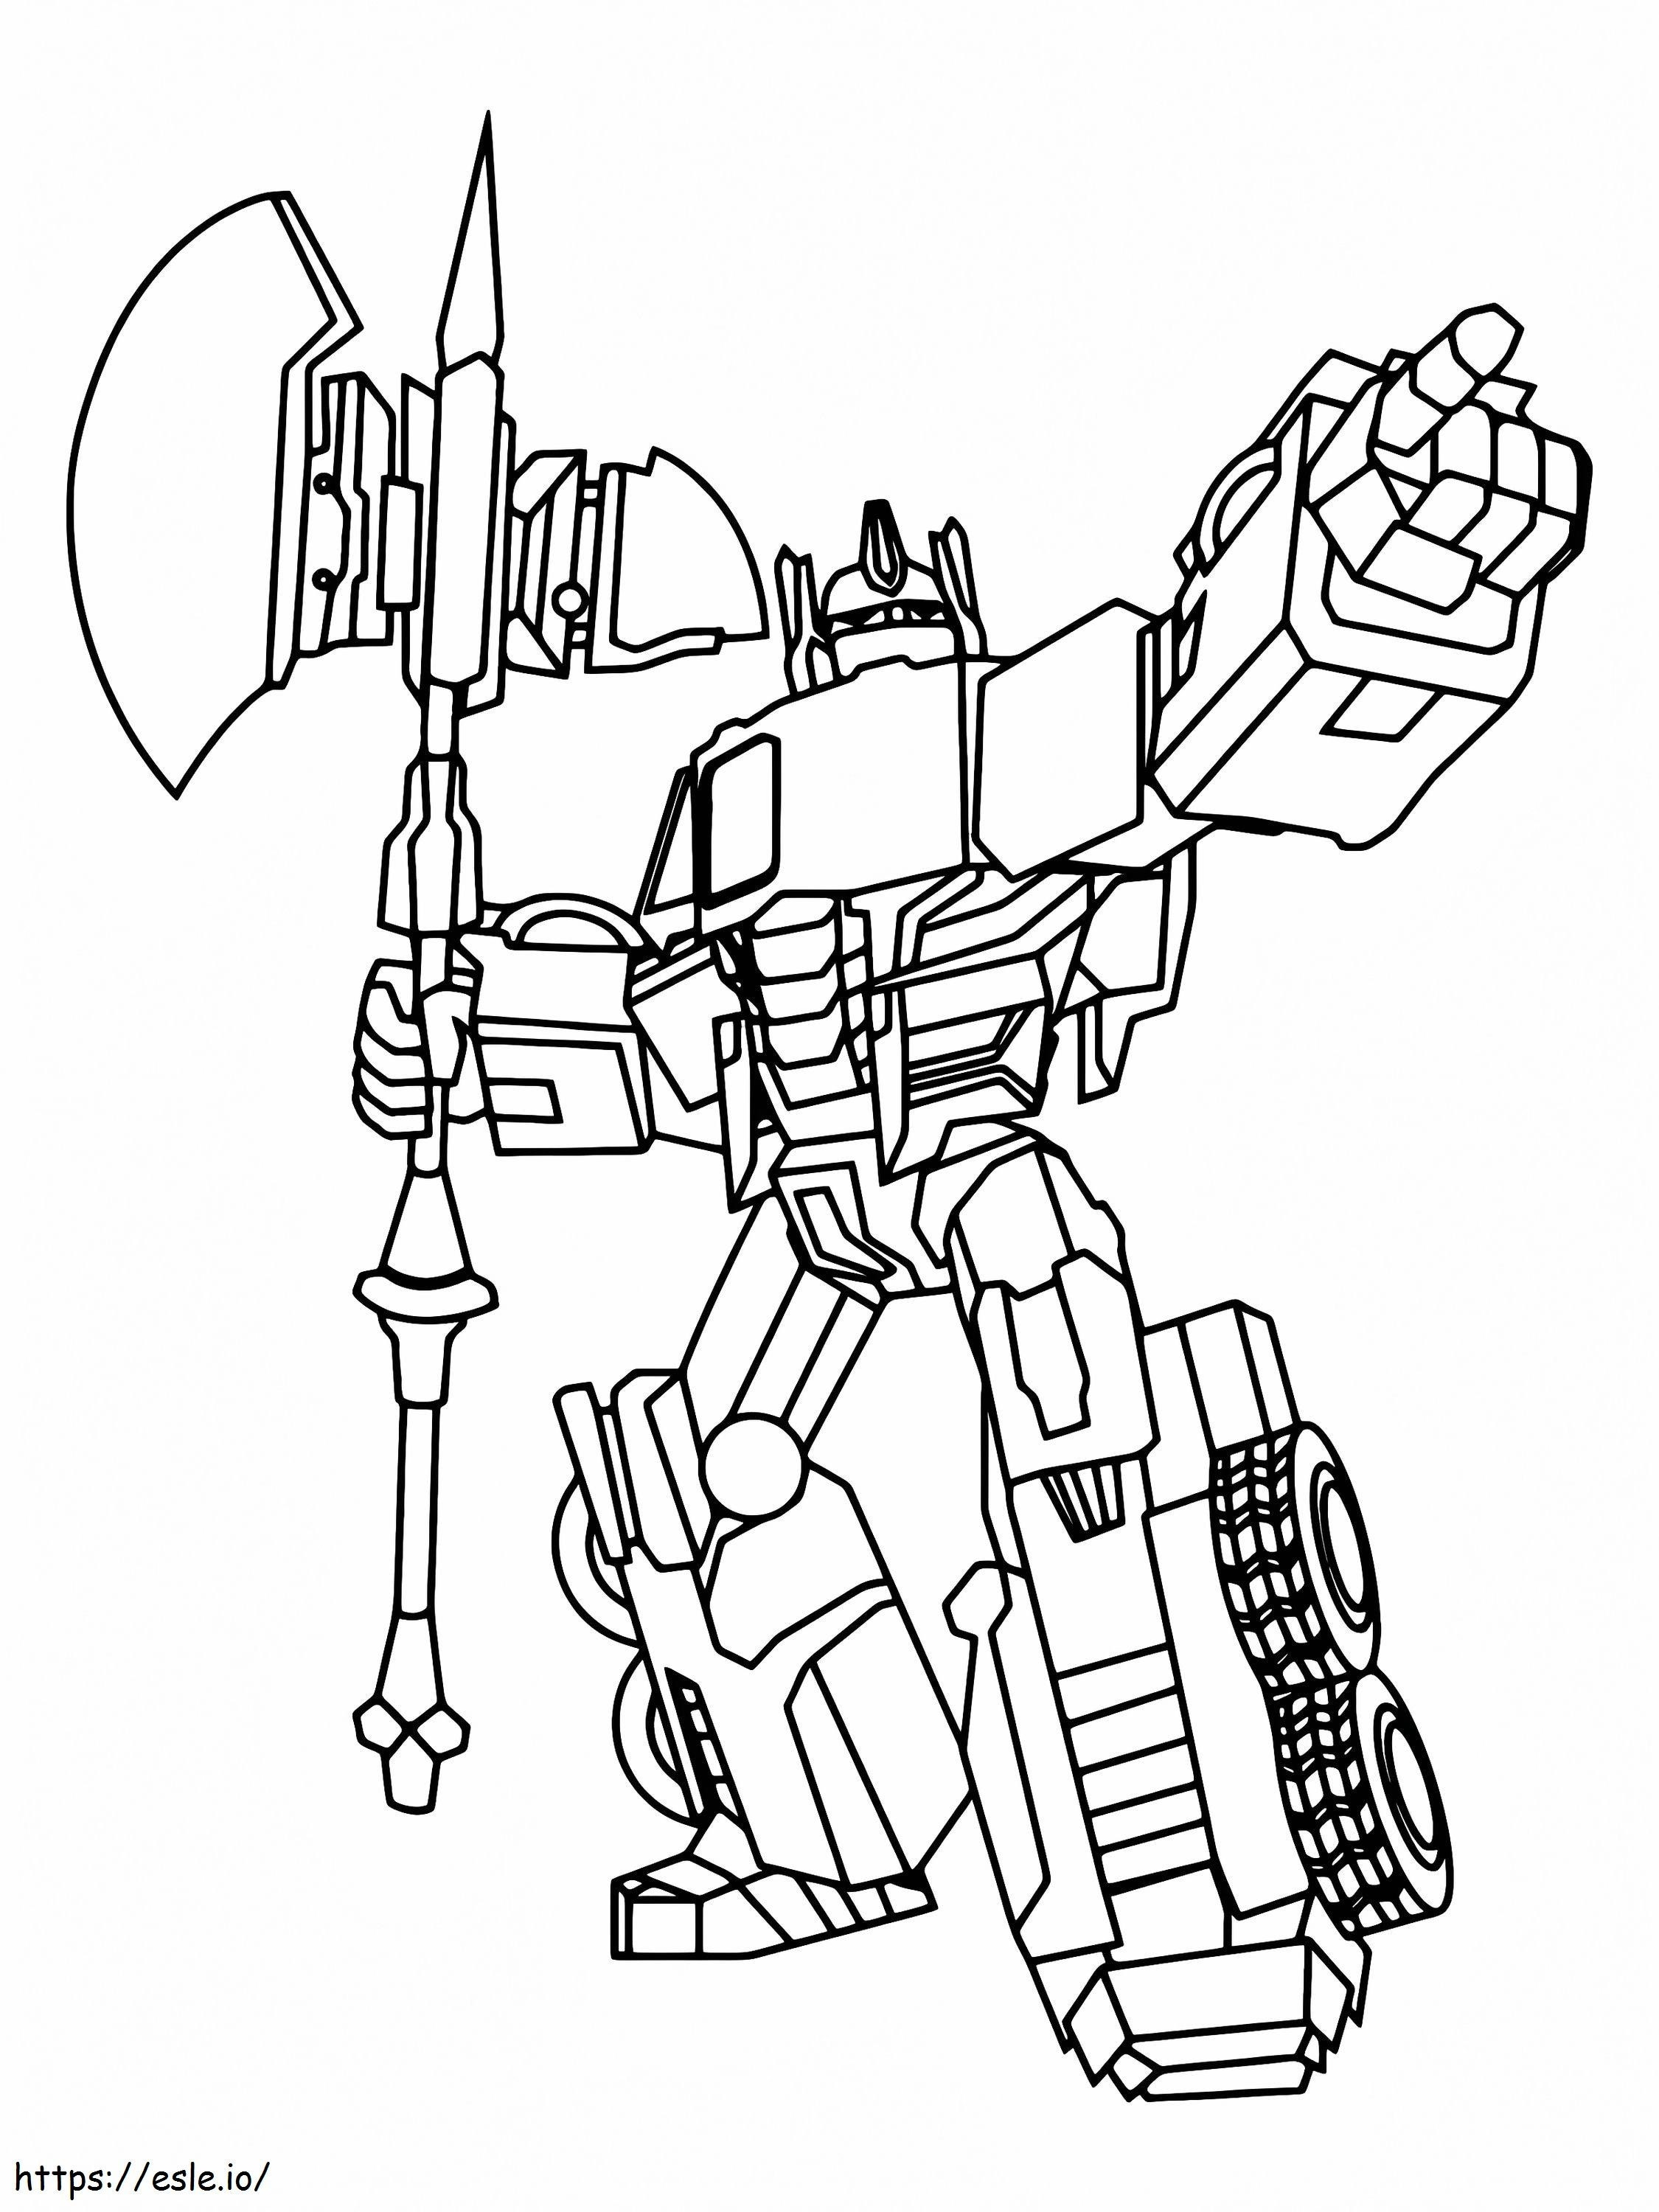 Leader Bumblebee coloring page